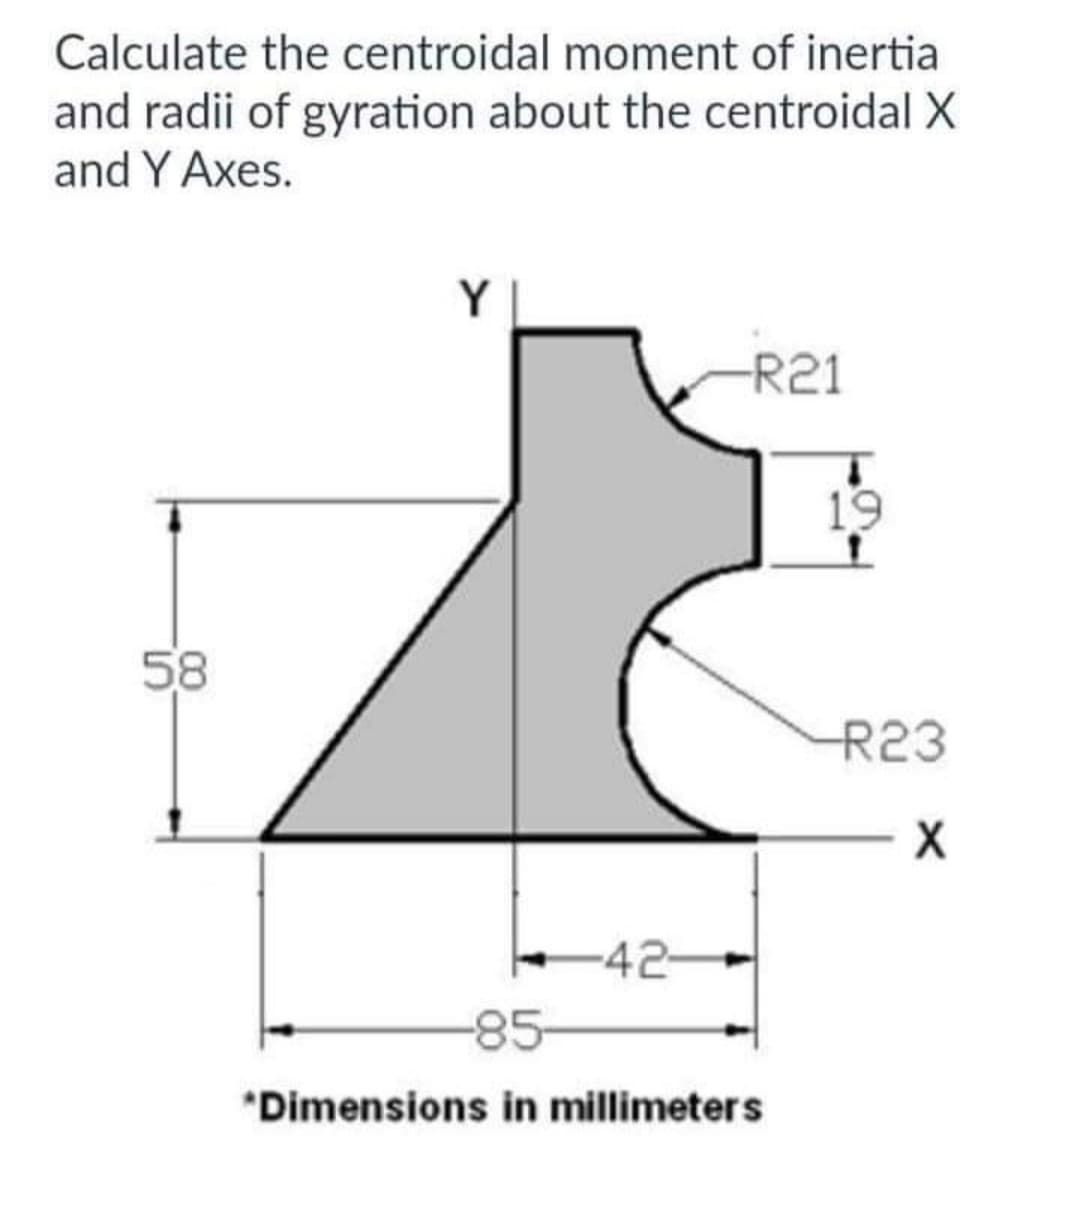 Calculate the centroidal moment of inertia
and radii of gyration about the centroidal X
and Y Axes.
58
Y
-42-
-R21
-85-
*Dimensions in millimeters
19
R23
X